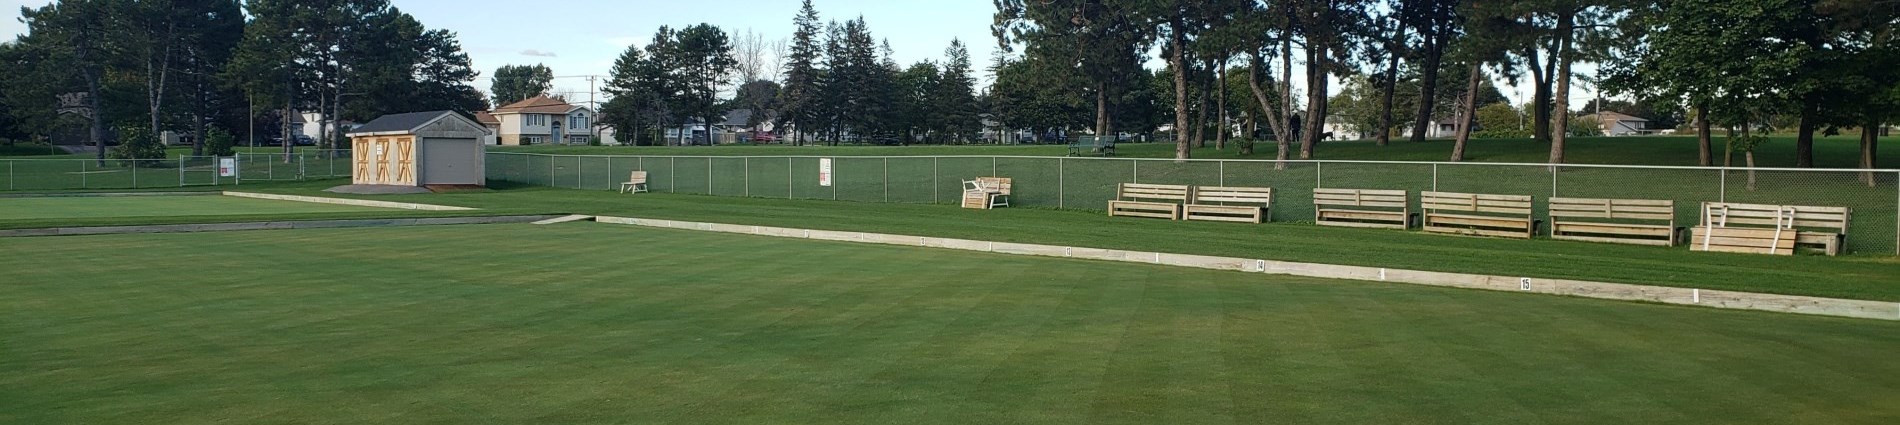 Photo of Lawn Bowling At Hillcrest Park